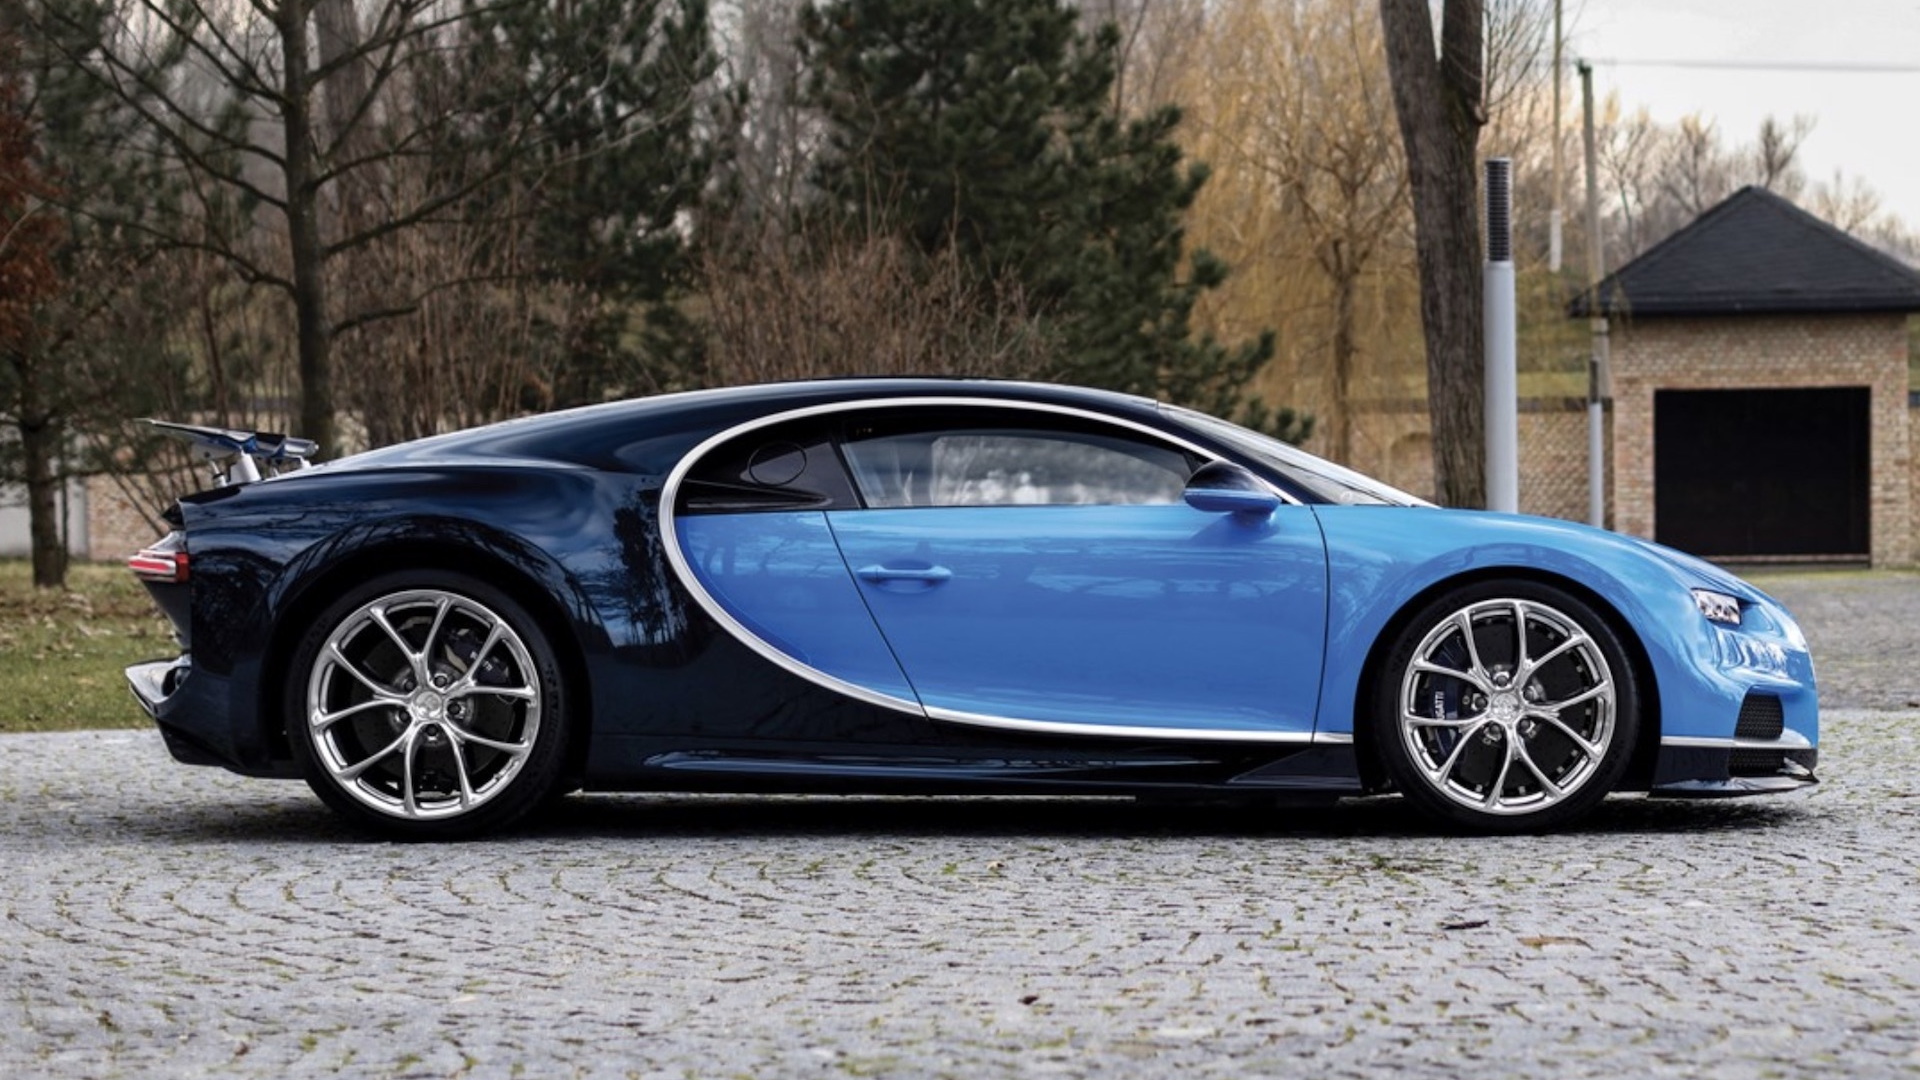 Bugatti Chiron heading to RM Sotheby's auction